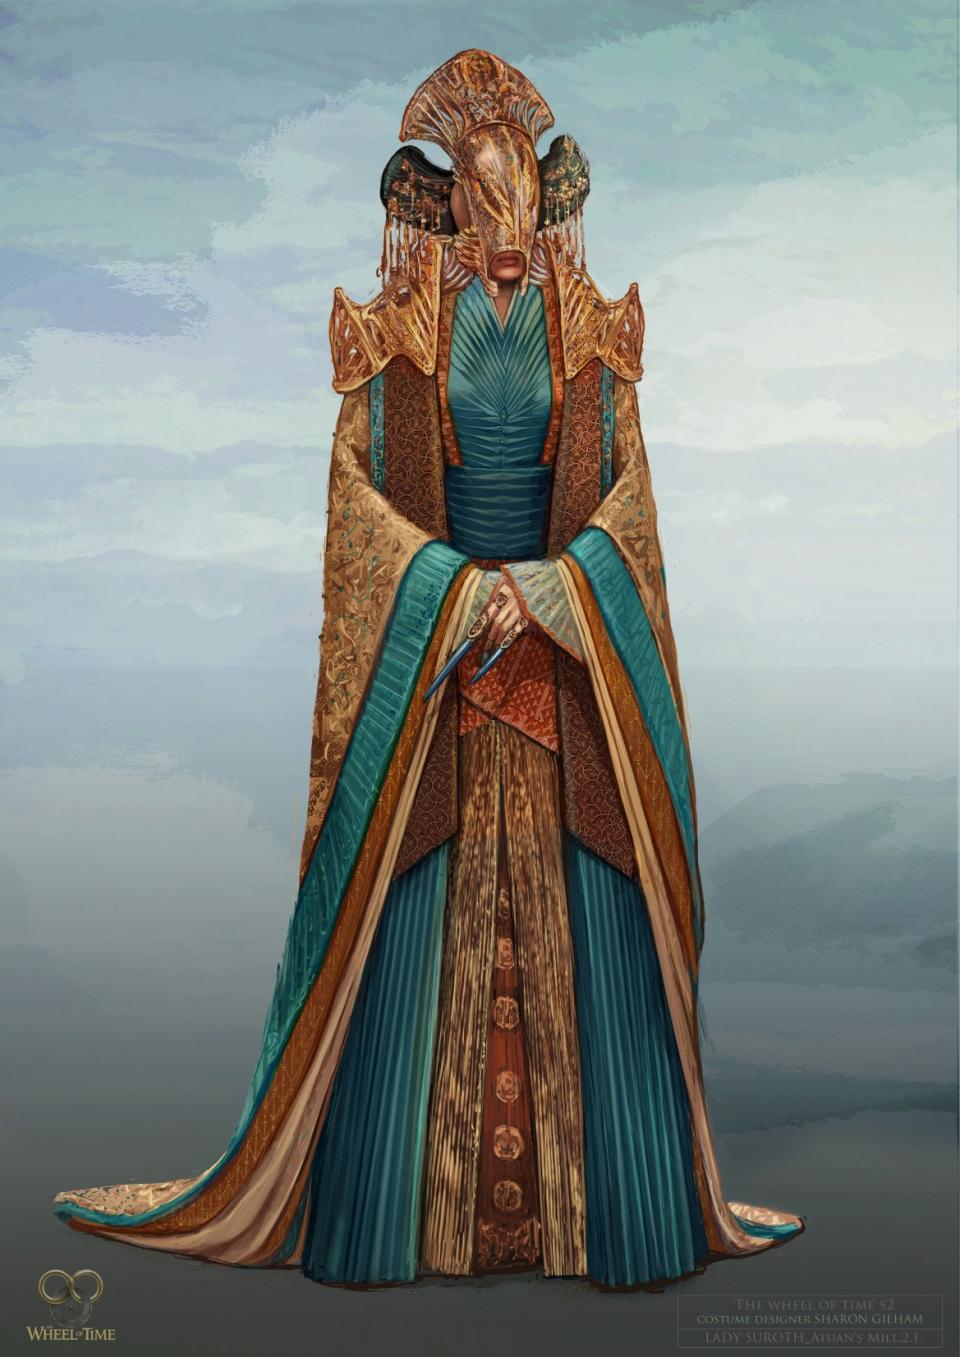 A costume sketch for High Lady Suroth of the Seanchan in The Wheel of Time